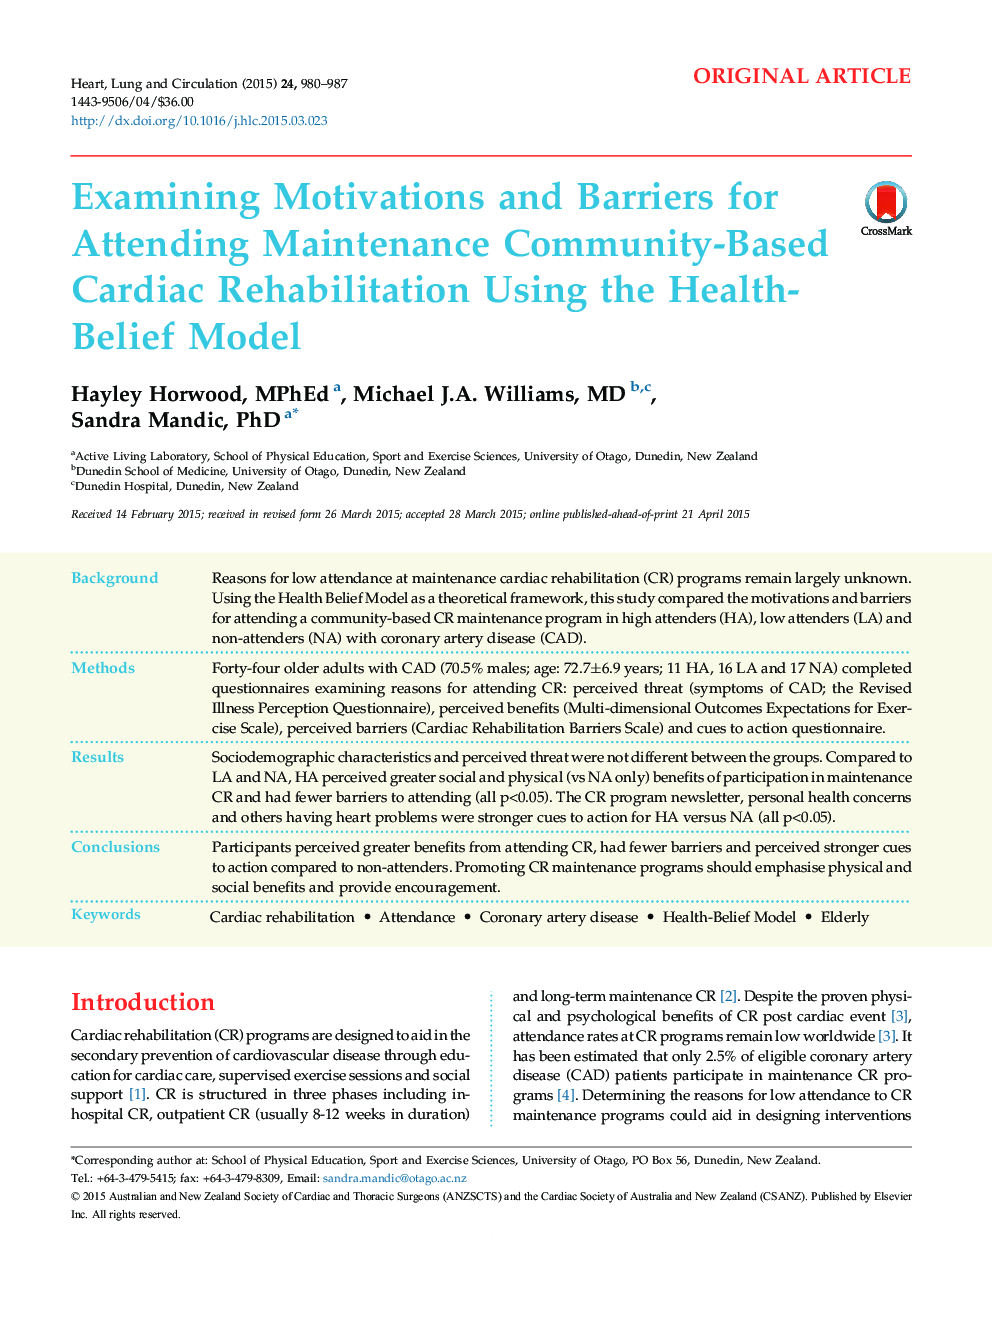 Examining Motivations and Barriers for Attending Maintenance Community-Based Cardiac Rehabilitation Using the Health-Belief Model